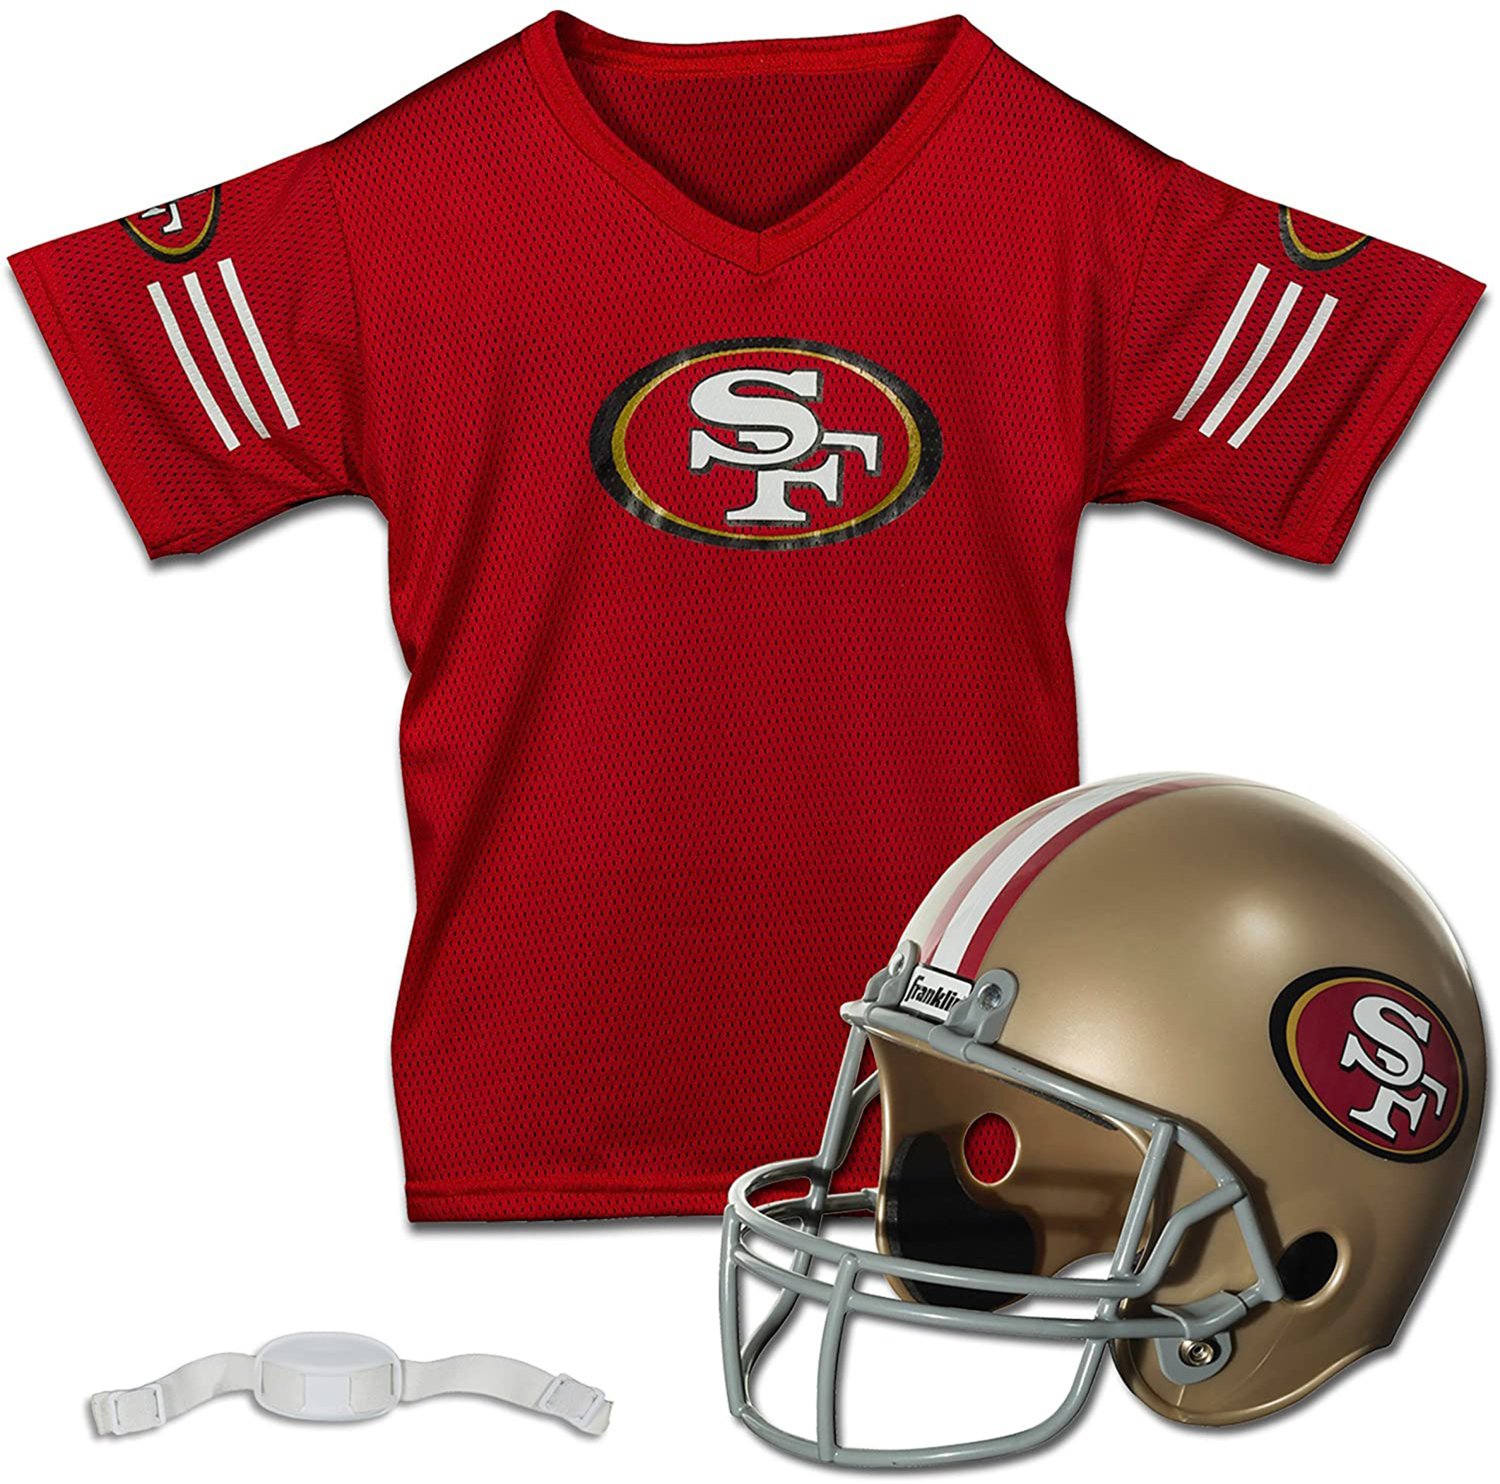 Franklin Youth San Francisco 49ers Helmet and Jersey Set